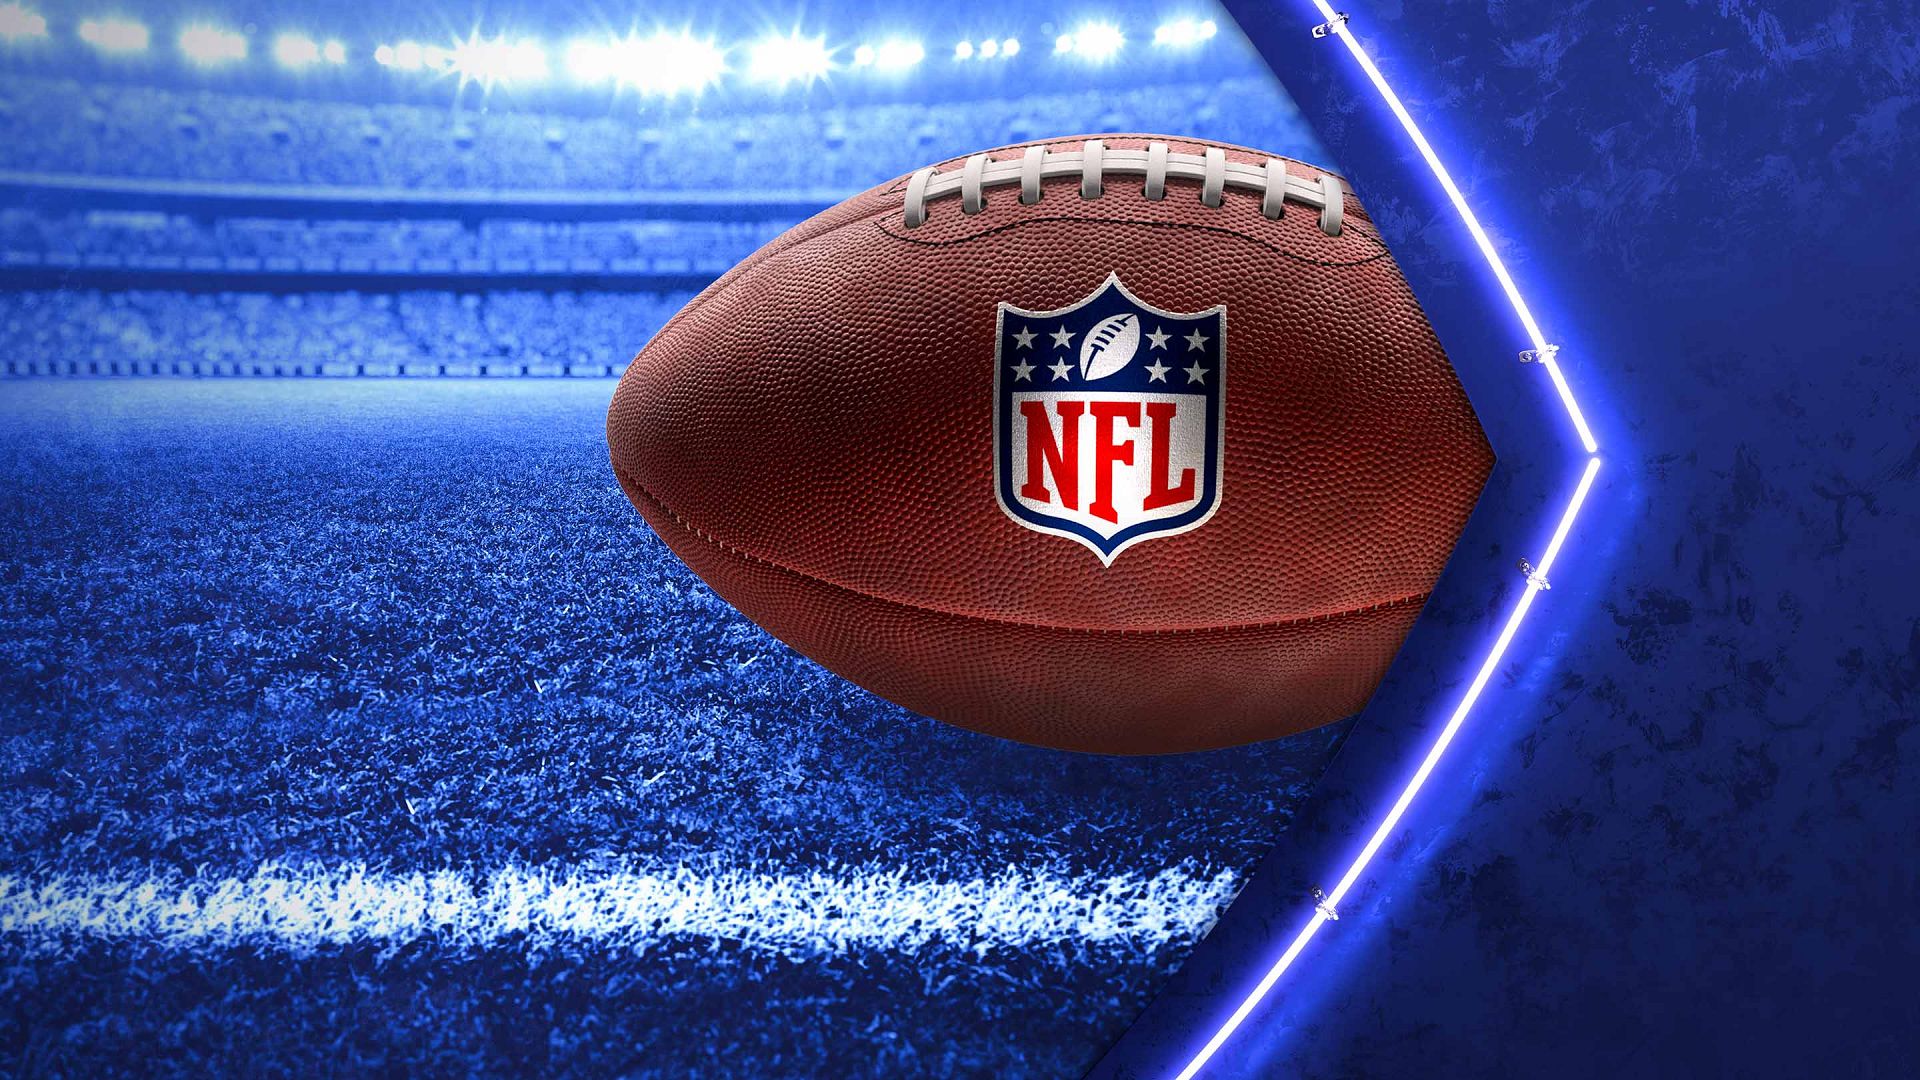 nfl matches today live